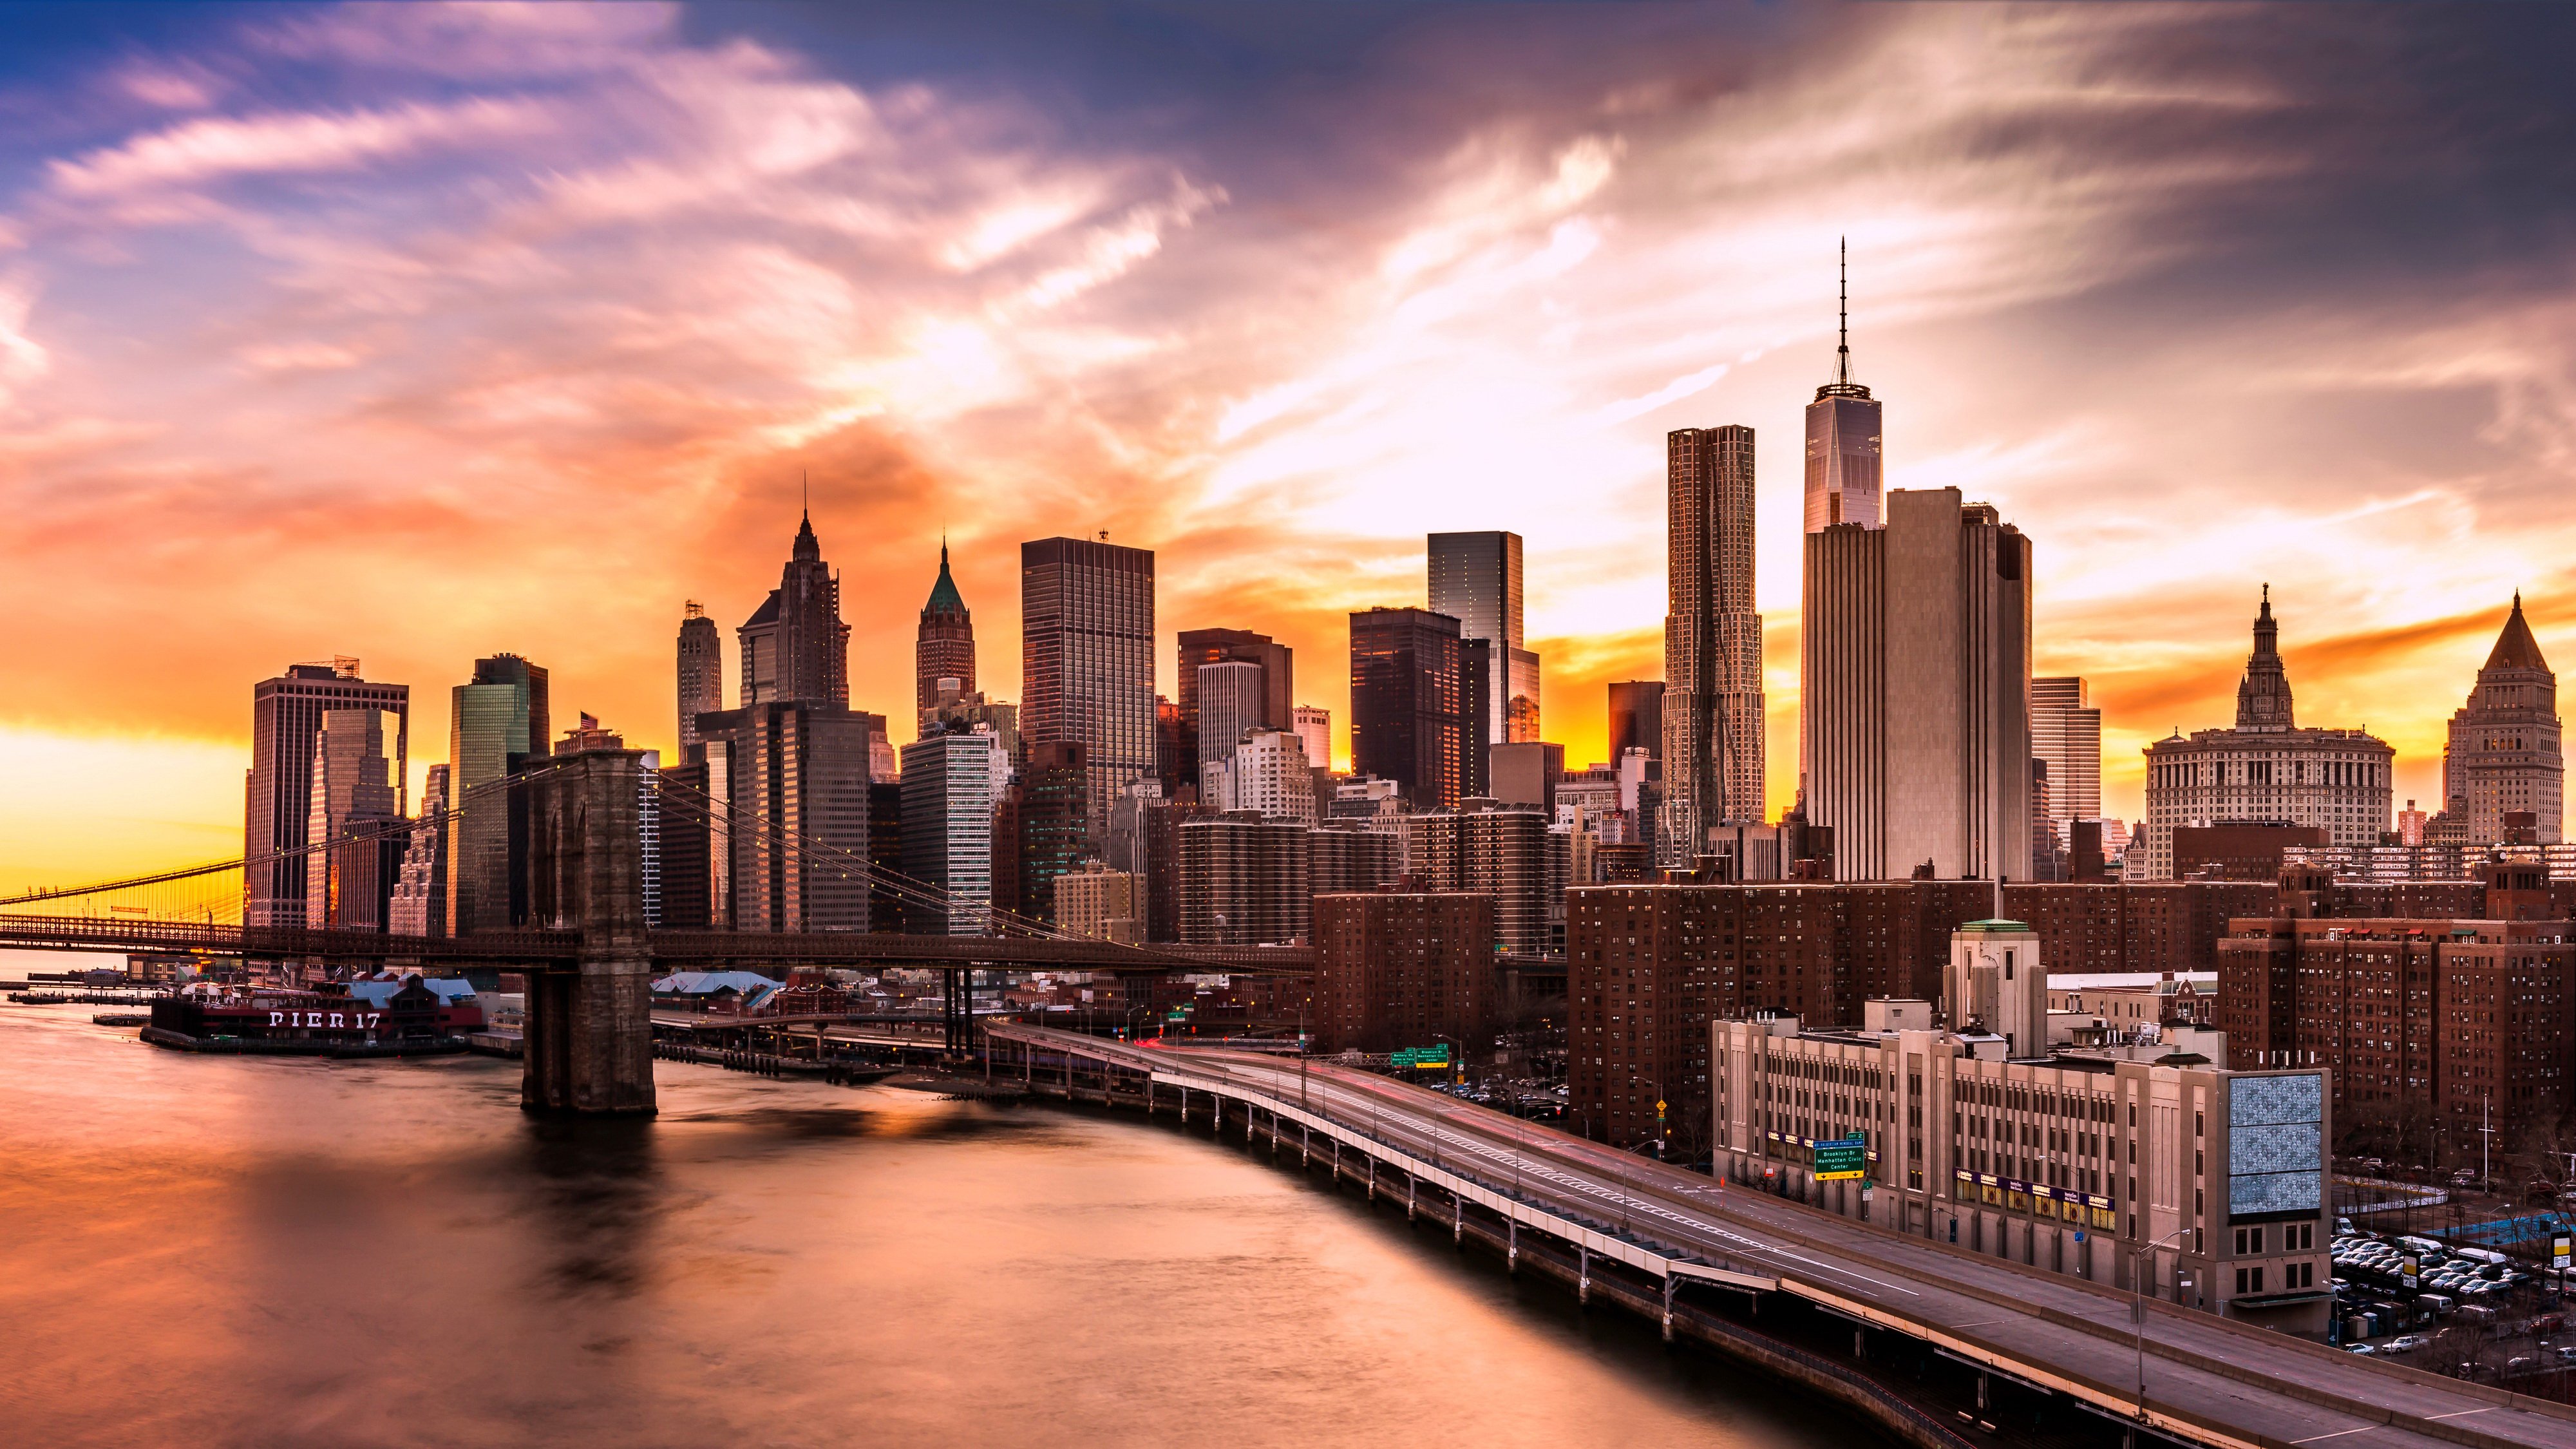 usa, Skyscrapers, Rivers, Bridges, Roads, Sunrises, And, Sunsets, New, York, City, Cities Wallpaper